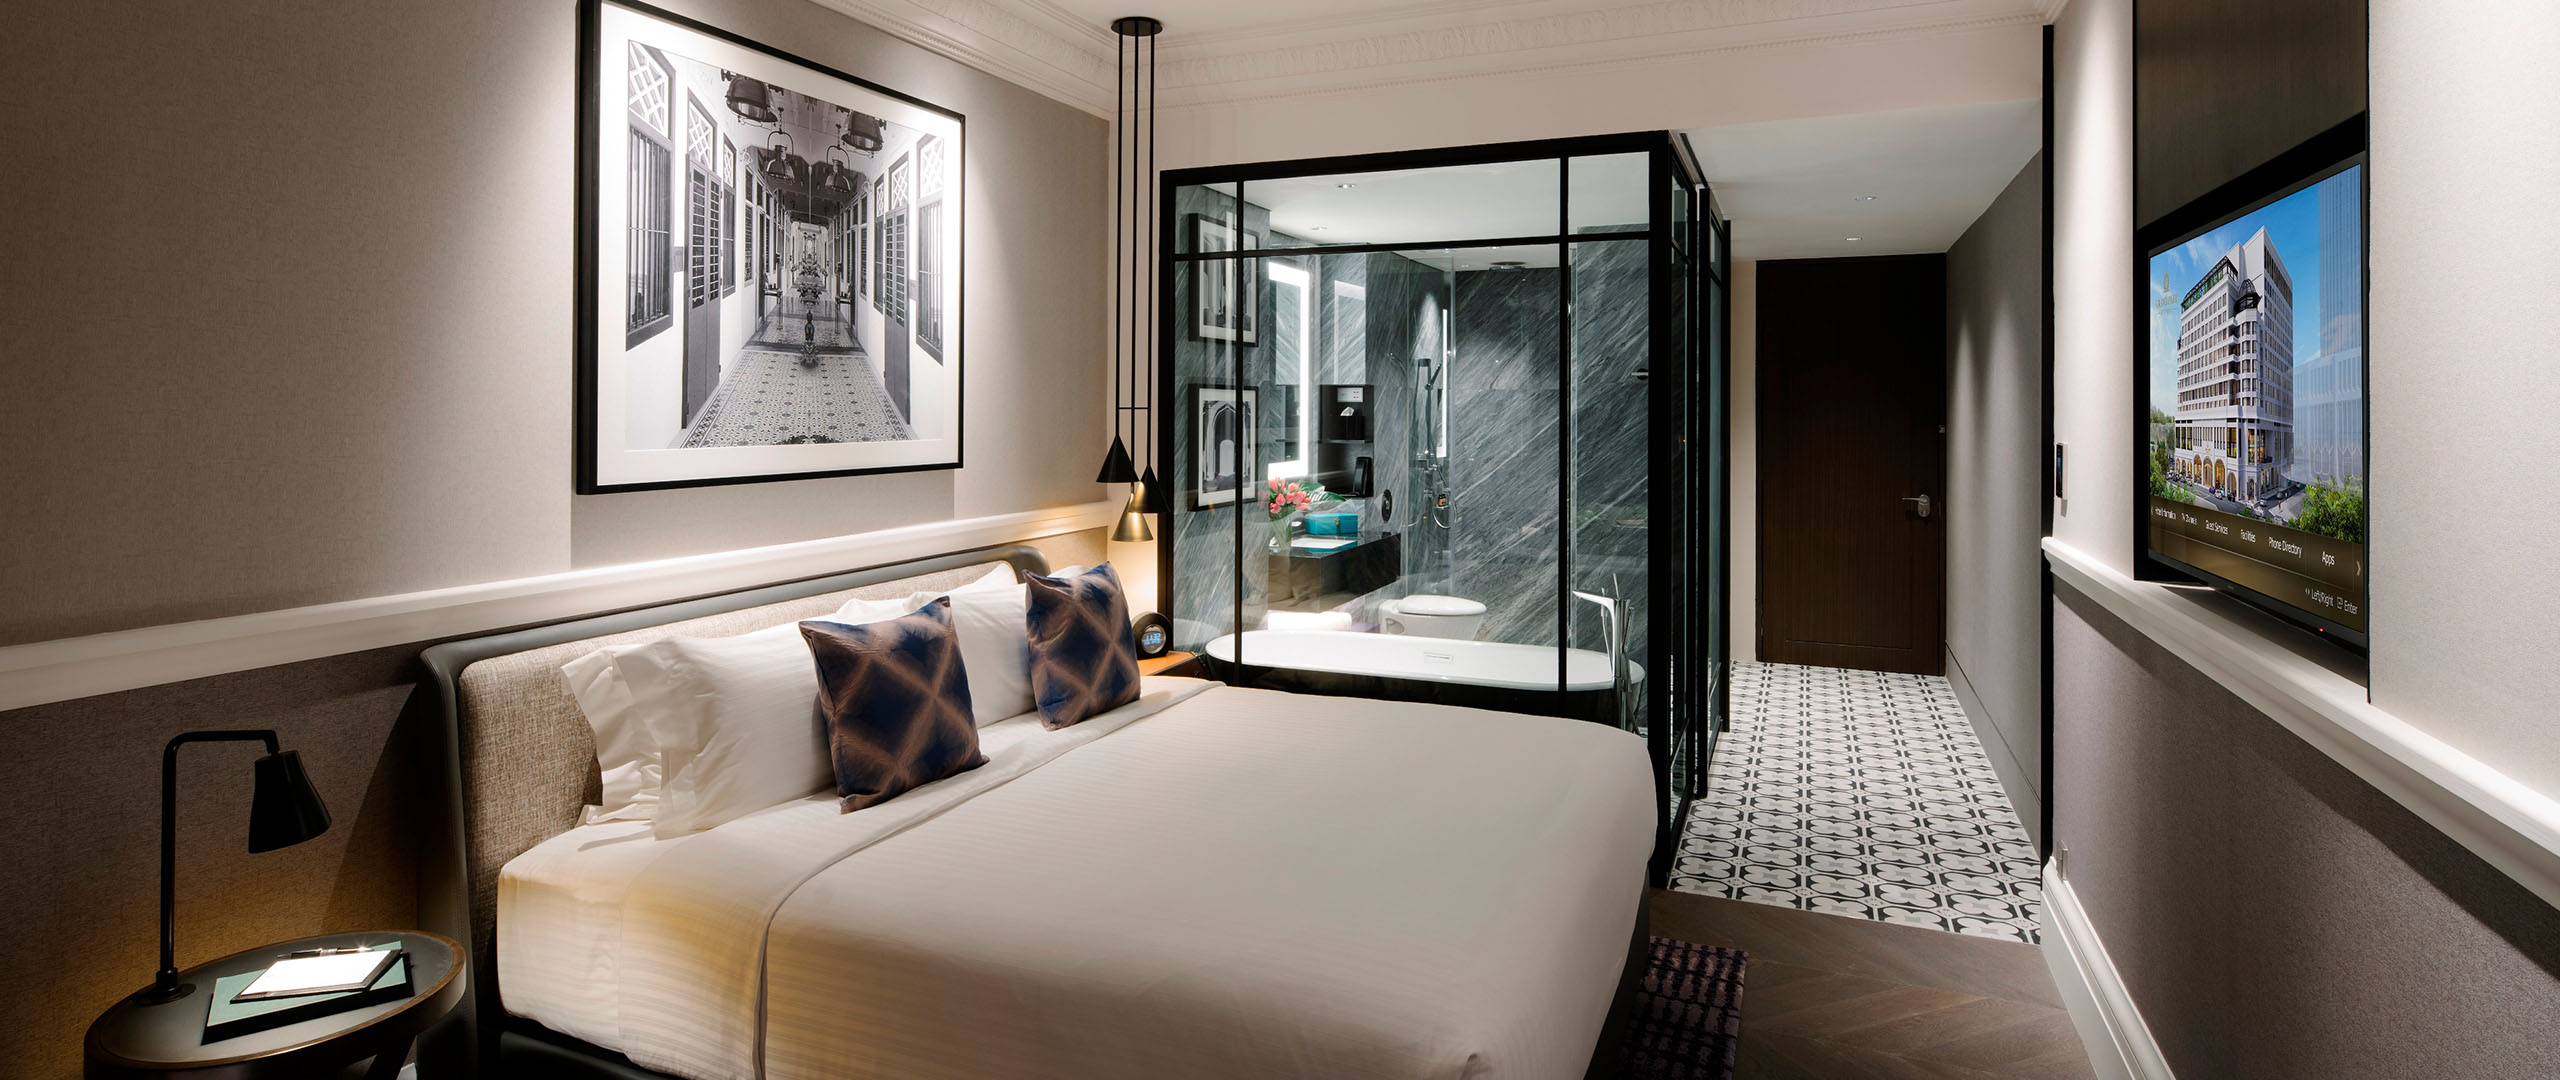 king bed with bathtub in hotel room